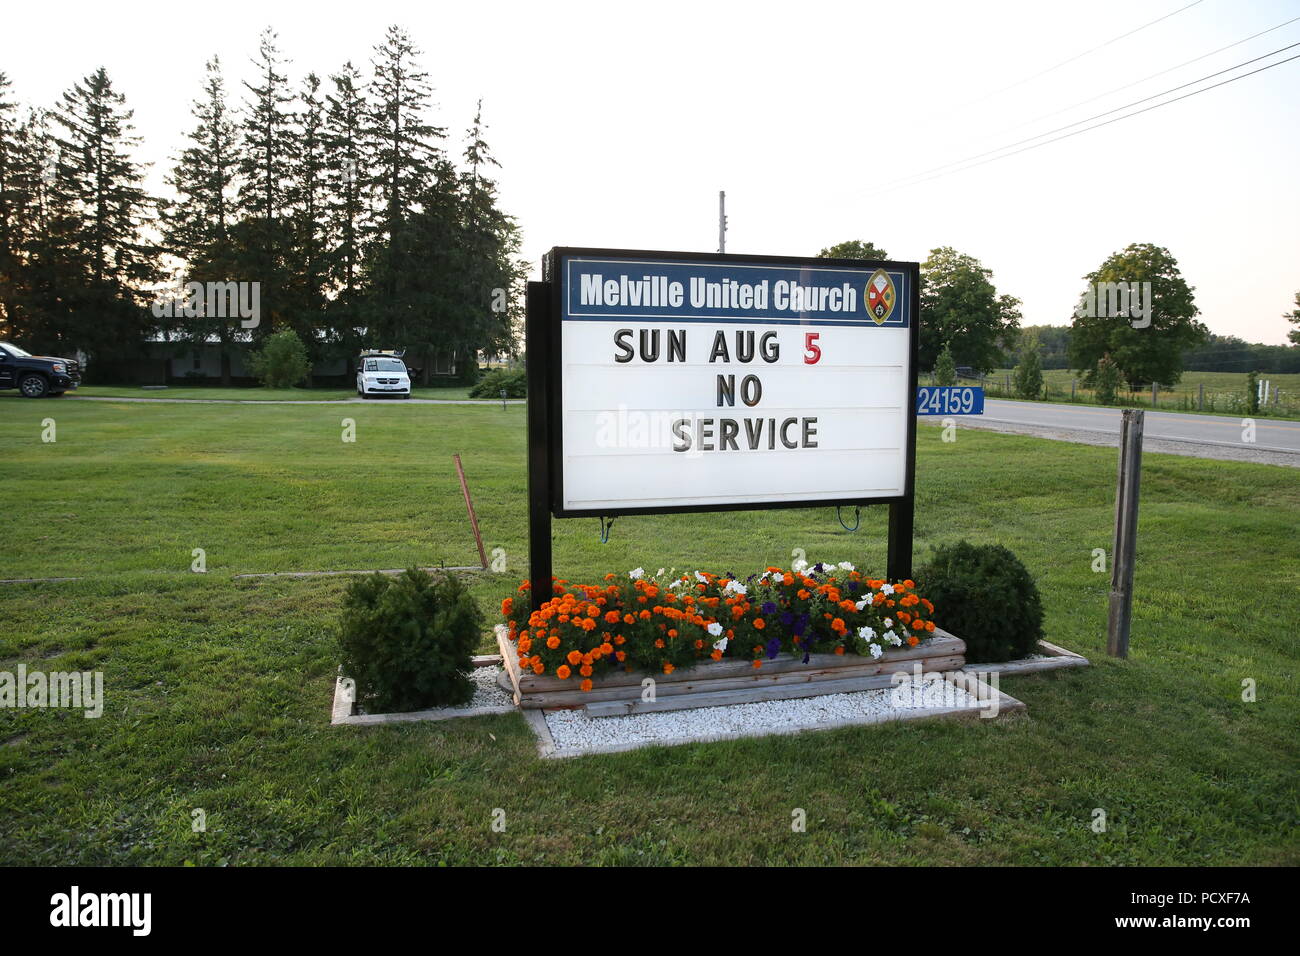 Ontario, Canada. 4 August2018. No one could tell you when the last time Sunday service was cancelled at Melville United Church in Lobo. Due to the Cycling event at 2018 Ontario summer games the mass was cancelled on Sunday Aug 5 2018,  The finish line is right in front of the church on Nairn Rd. The church is also being used as a location to feed the athletes and volunteers of the games.  “The congregation voted unanimously to close the church for the day. This was decided to support the Ontario Summer Games, our young athletes, and because we saw it as an opportunity for community outreach, O Stock Photo